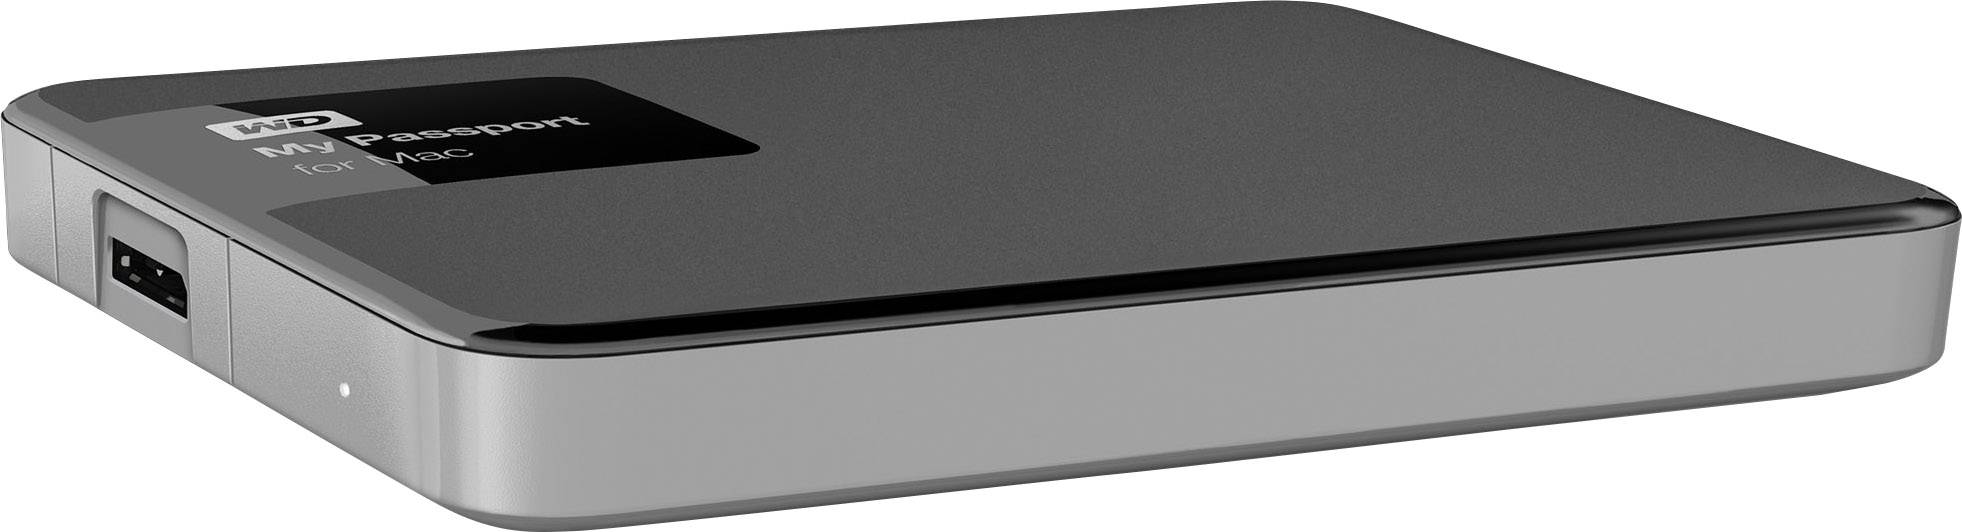 western digital my passport for mac and access files